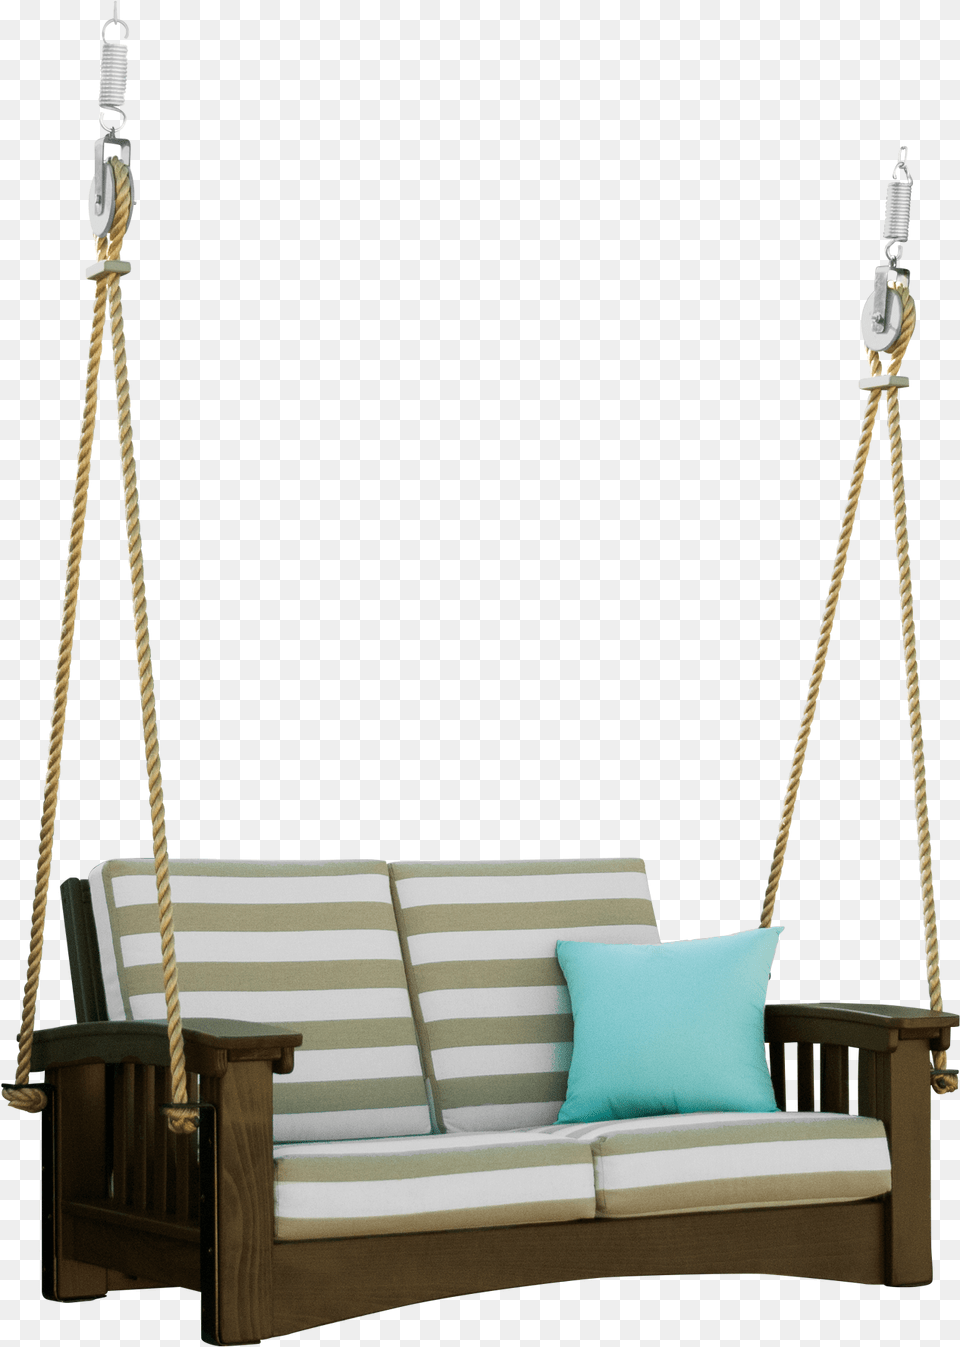 Porch Swing Pic Porch Swing, Toy, Couch, Furniture, Crib Free Png